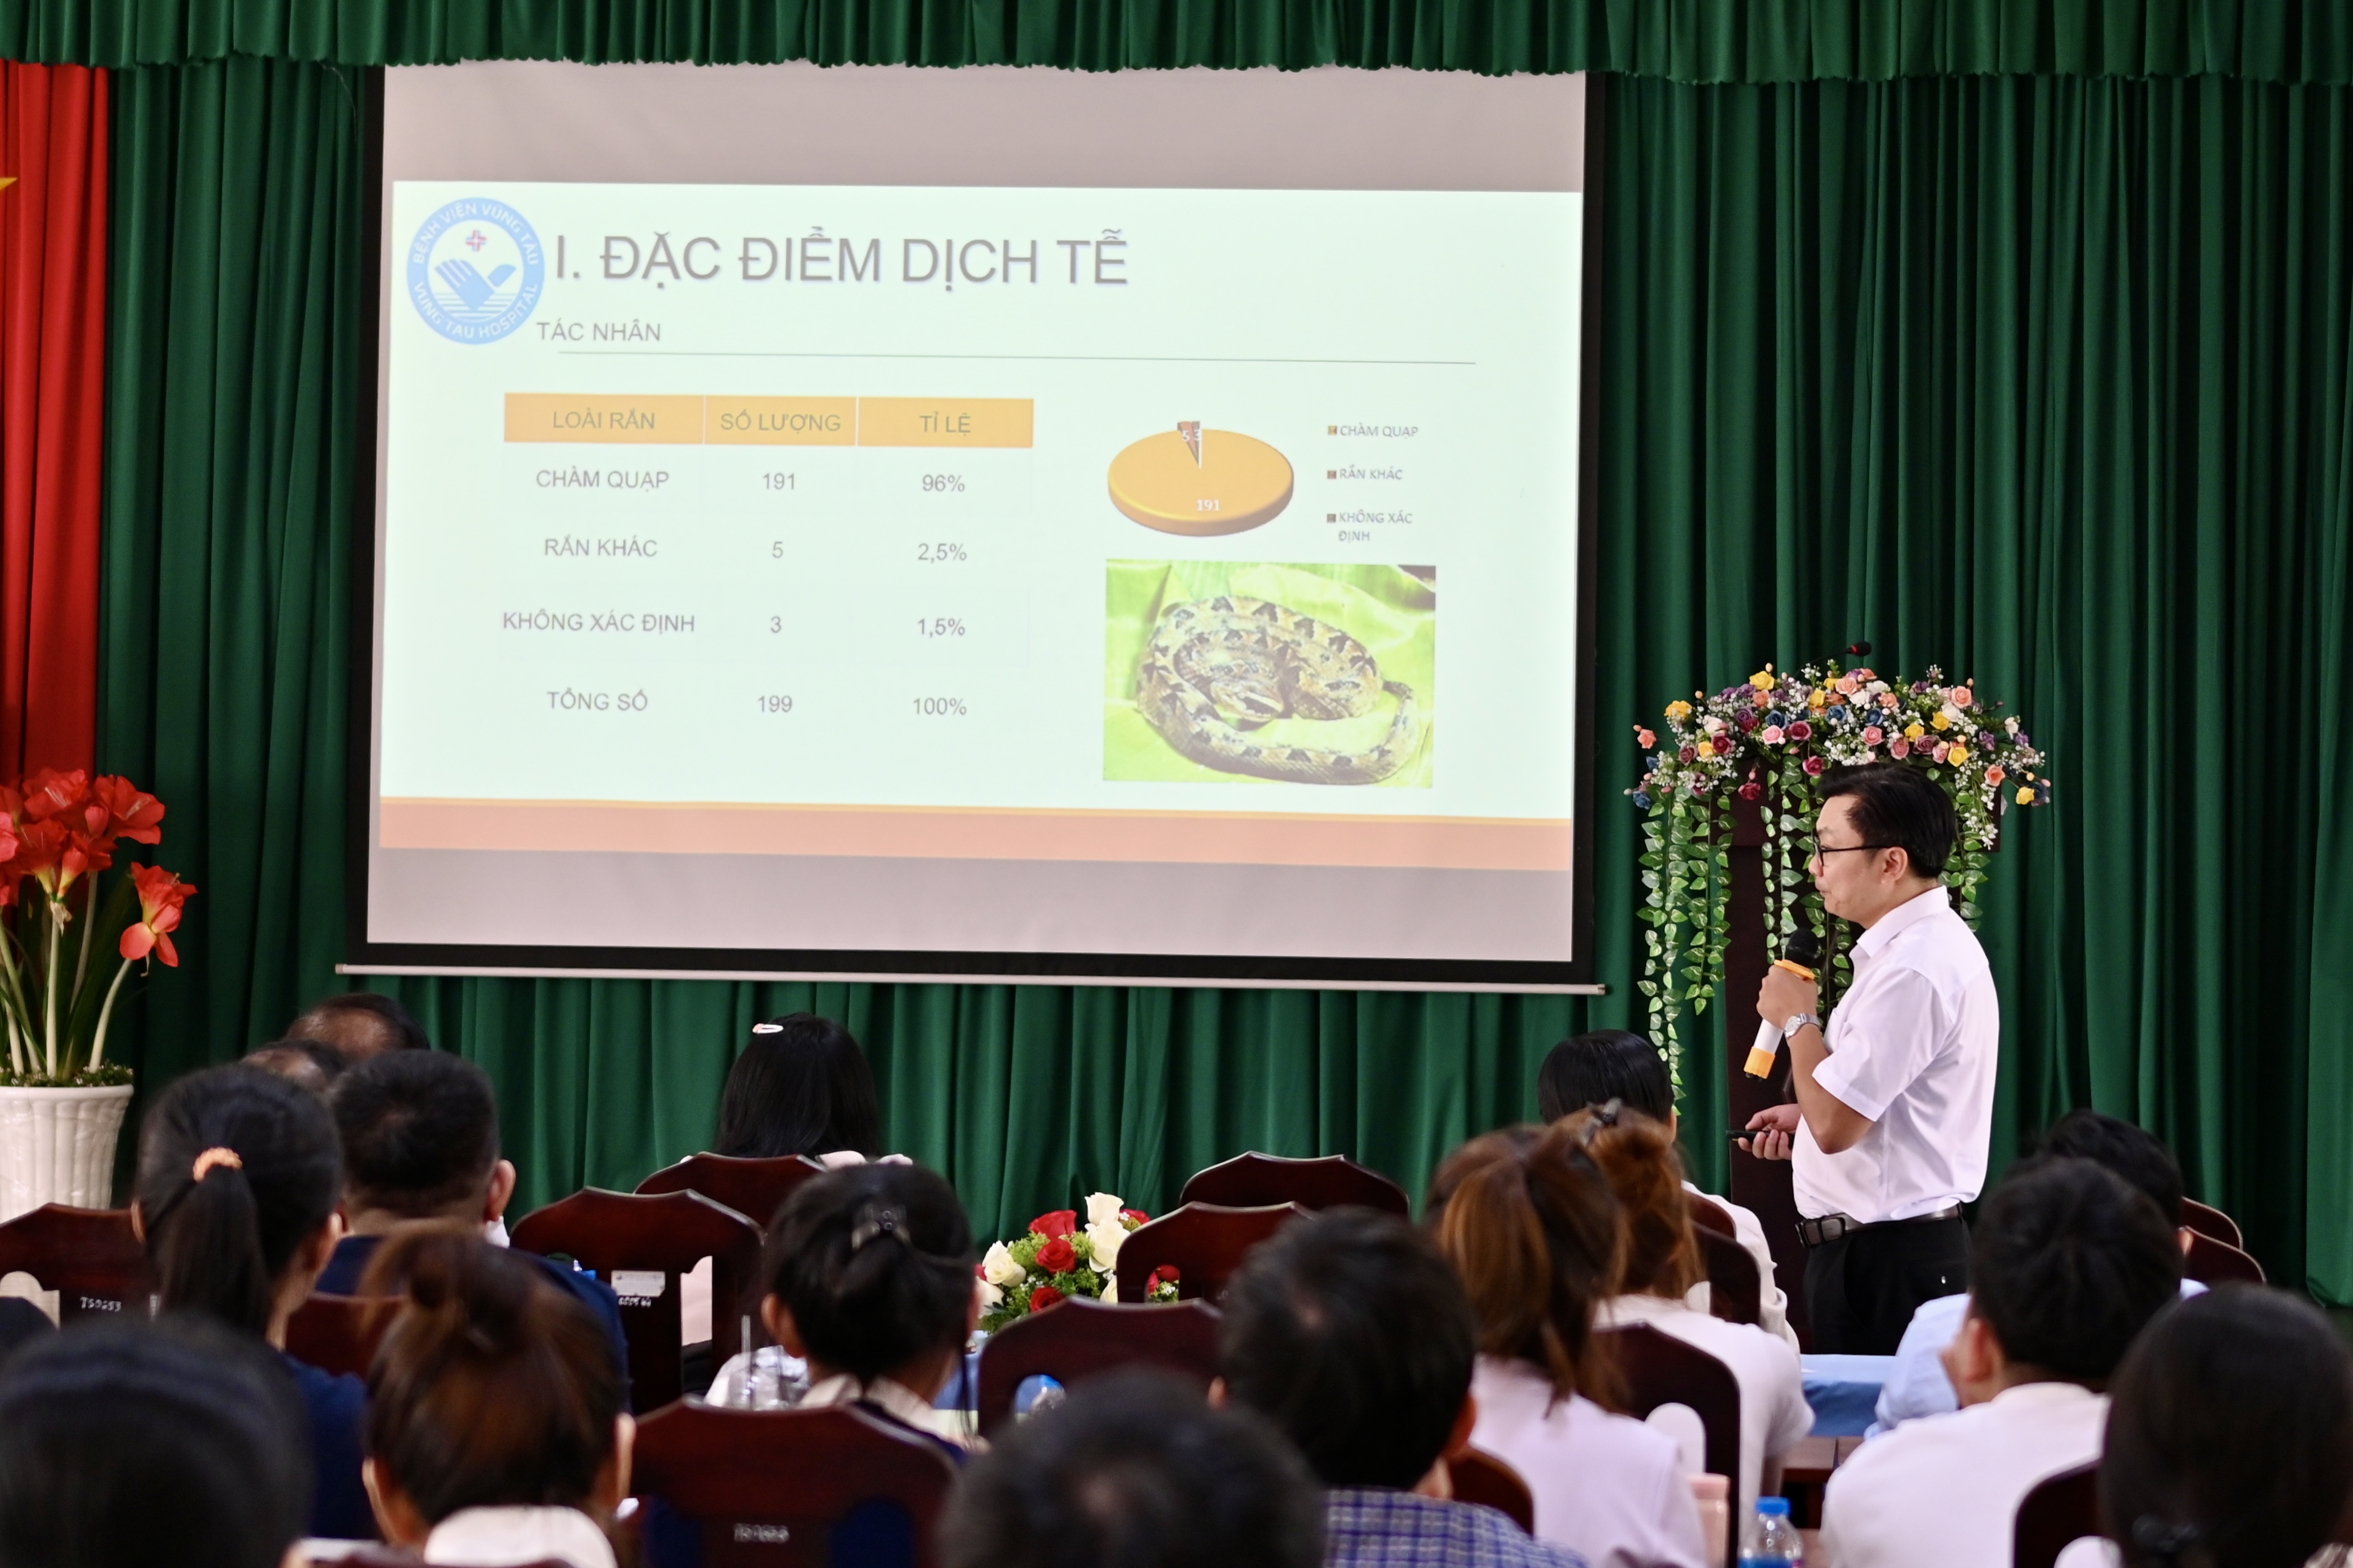 Building Capacity to Save Lives: The Institute for Community Health Research Conducts Snakebite Management Training in Dong Nai, Vietnam